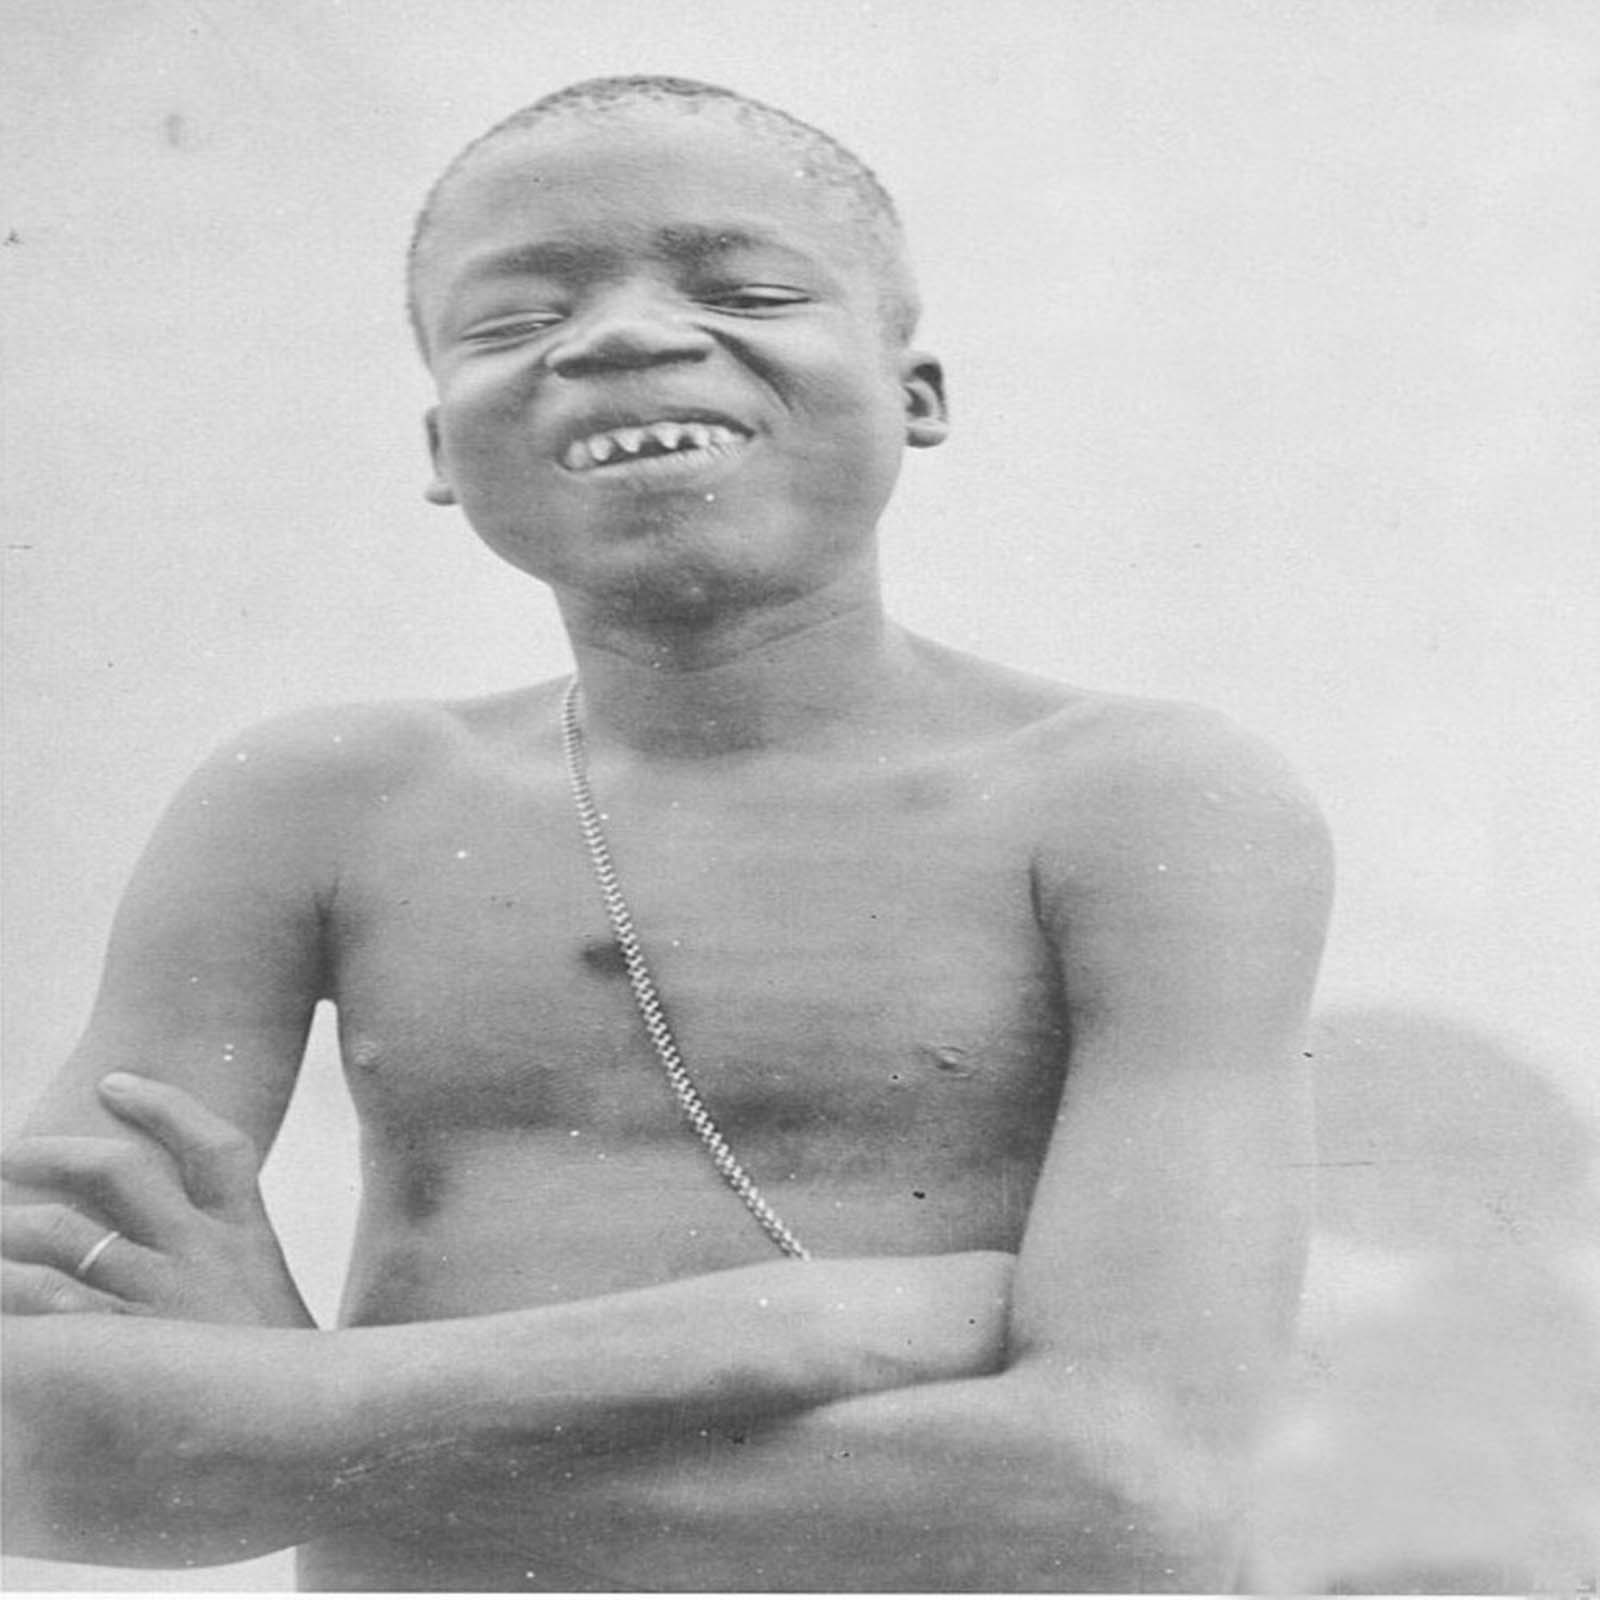 Ota Benga, a Congolese man exhibited in the New York’s Bronx Zoo in 1906, was shockingly described as a ‘missing link’ of evolution. Over 40,000 people came to see him every day and was often subject to mocking from the crowd.